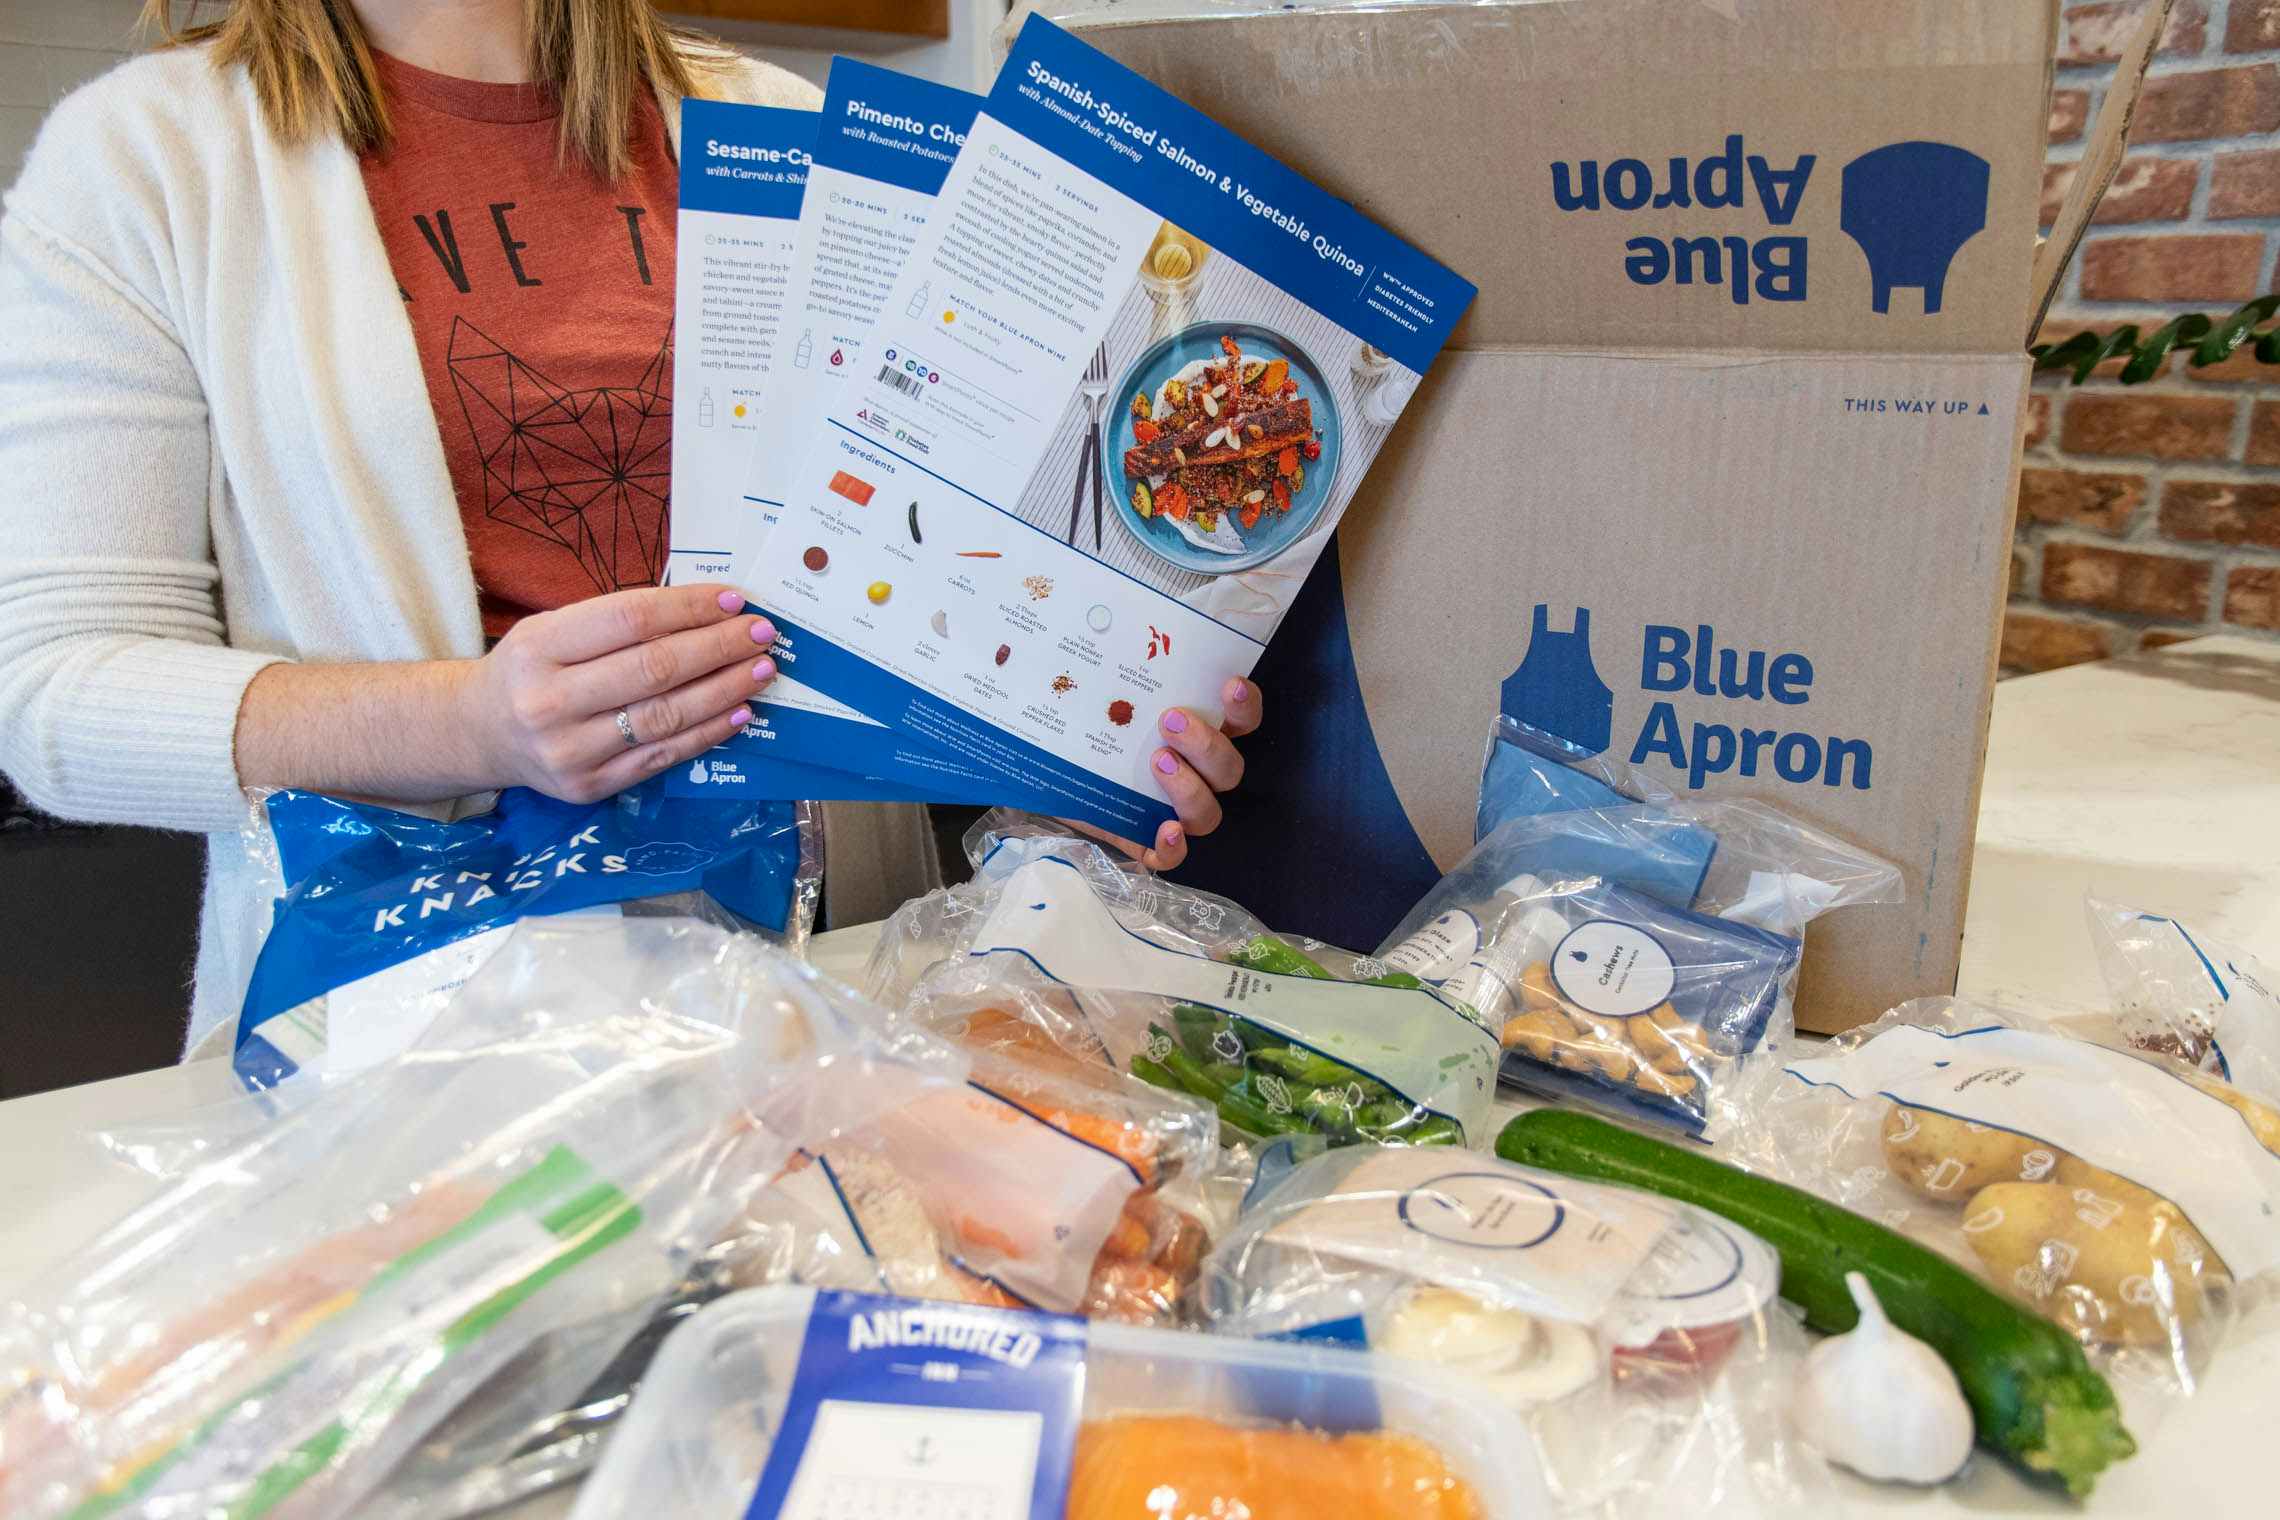 A woman holding the Blue Apron meal kit recipe cards next to the meal kit box and food.